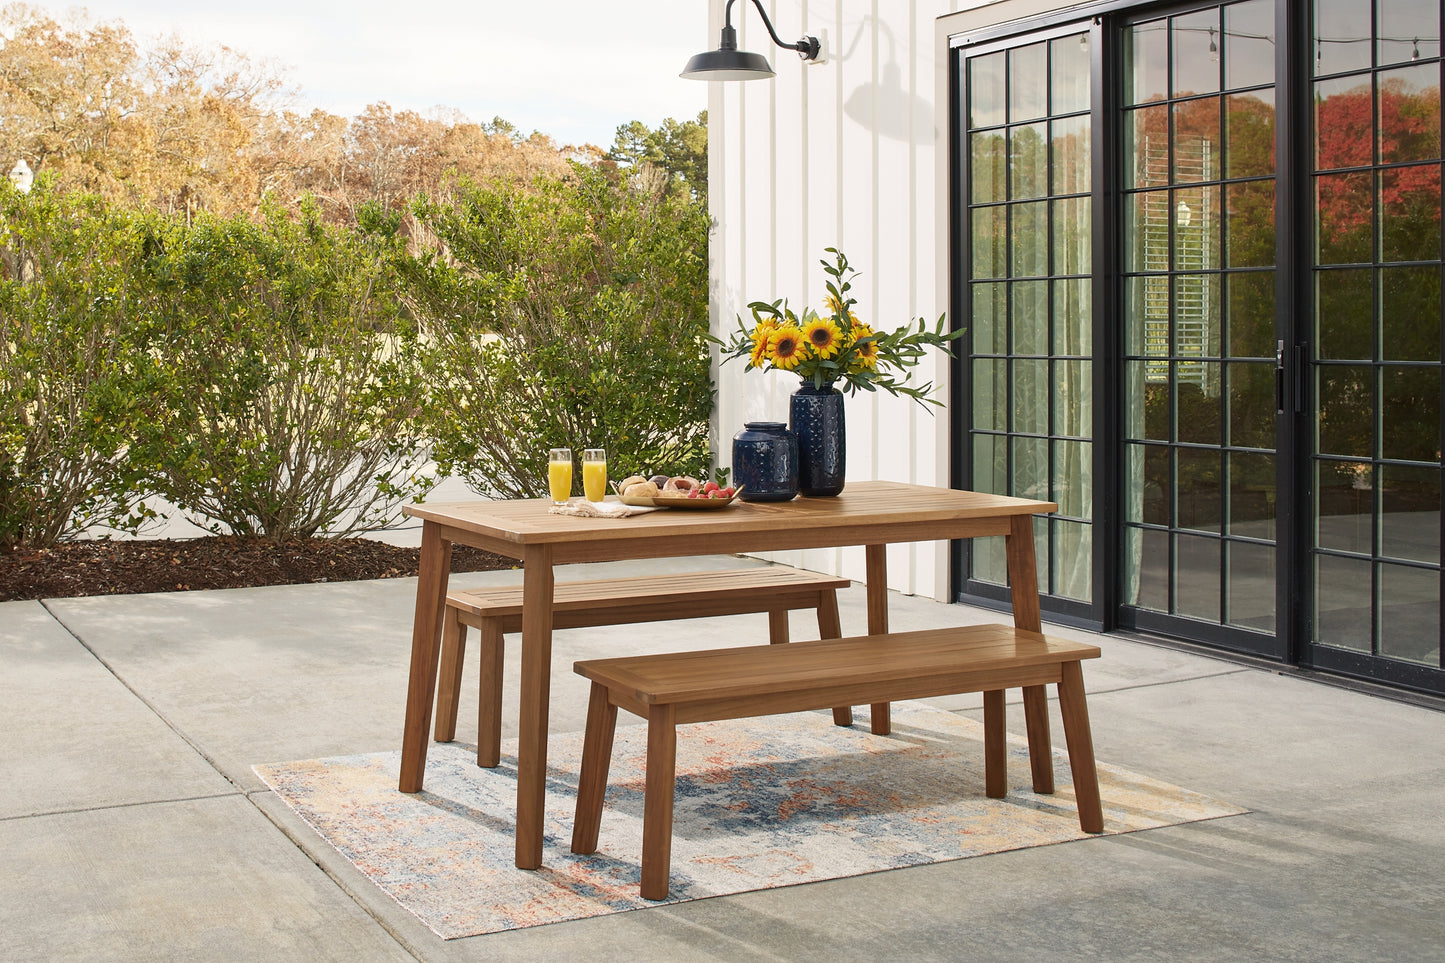 Janiyah Outdoor Dining Table and 2 Benches Wilson Furniture (OH)  in Bridgeport, Ohio. Serving Bridgeport, Yorkville, Bellaire, & Avondale